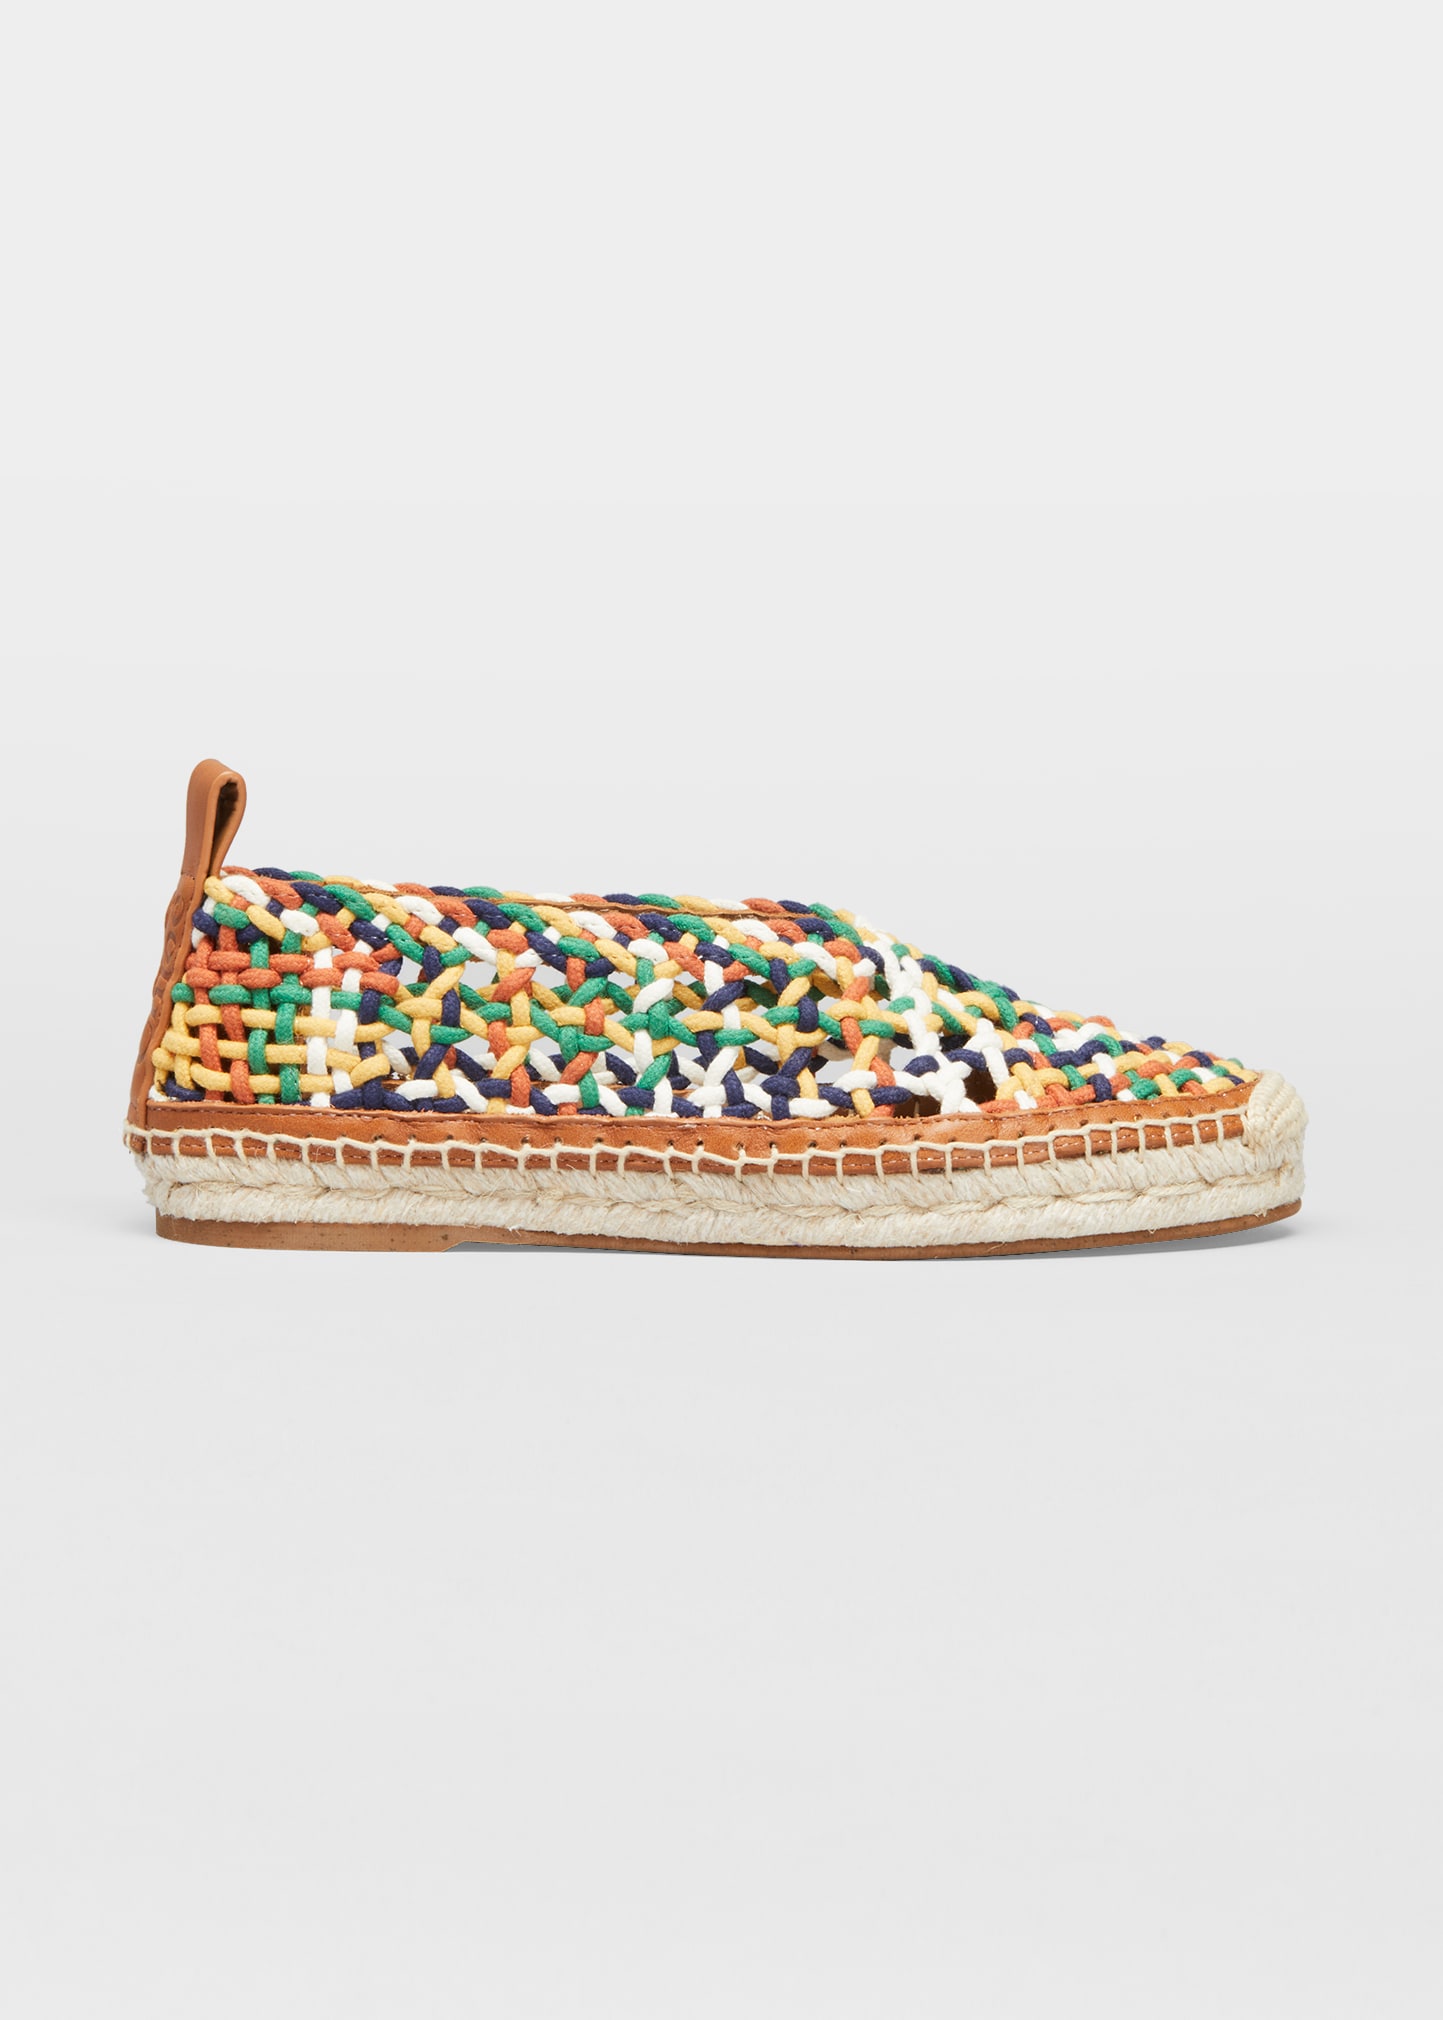 Chloe Luccia Woven Leather Loafer Espadrilles